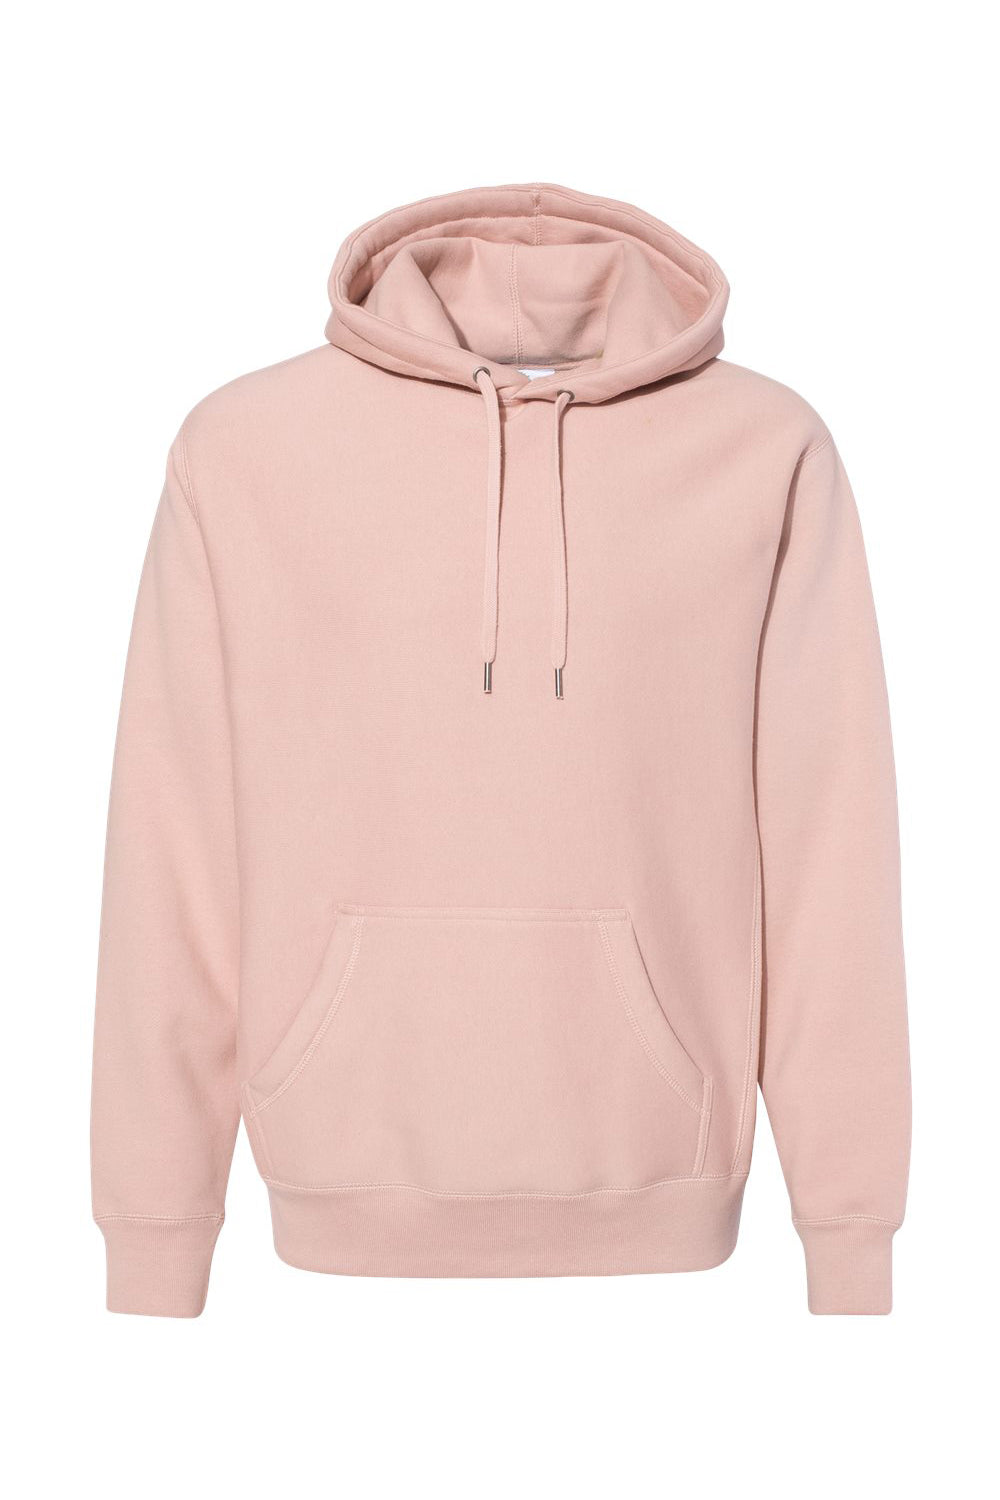 Independent Trading Co. IND5000P Mens Legend Hooded Sweatshirt Hoodie Dusty Pink Flat Front